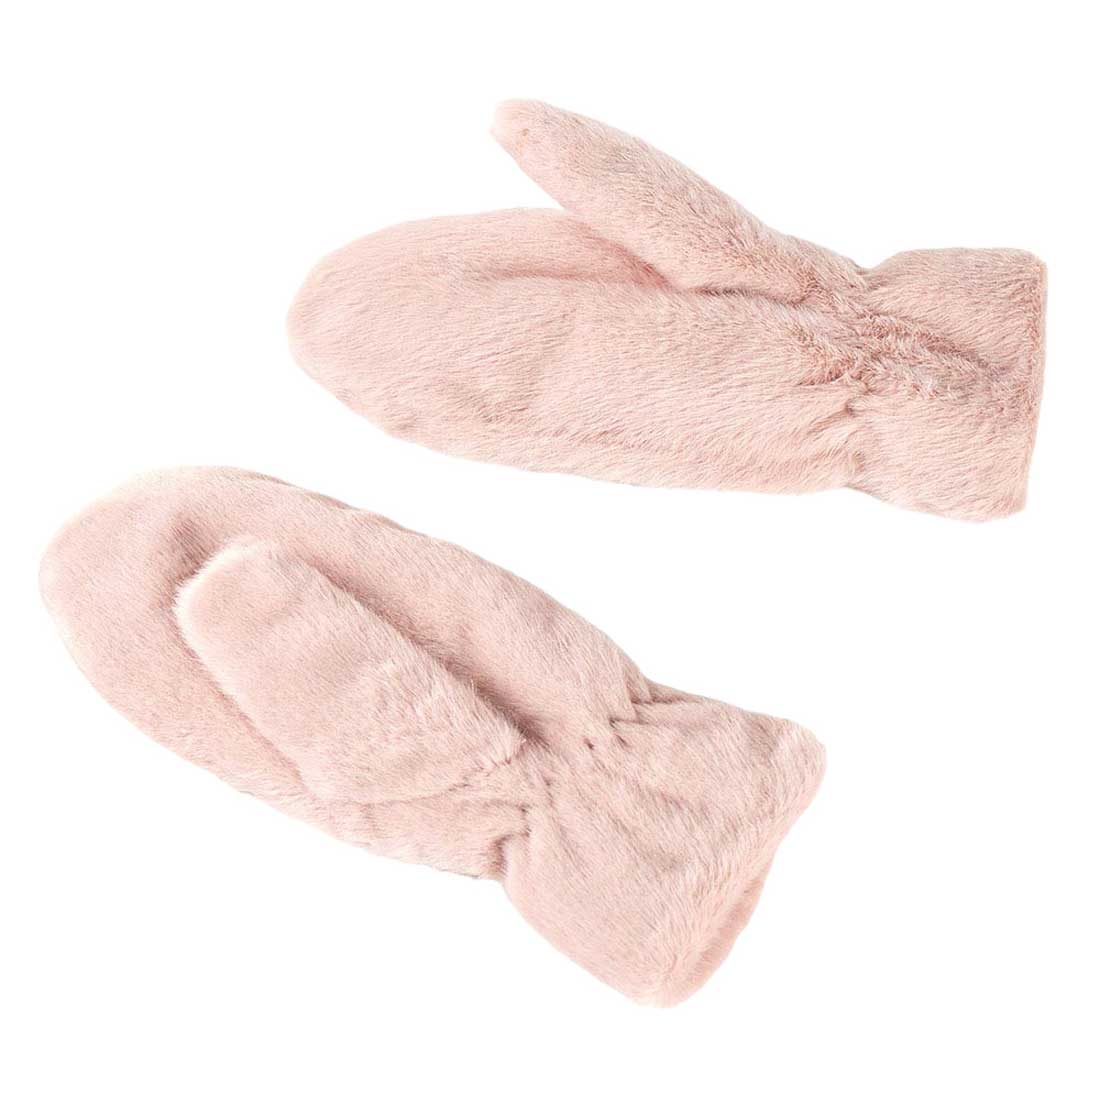 Pink Faux Fur Mitten Gloves, are a smart, eye-catching, and attractive addition to your outfit. These trendy gloves keep you absolutely warm and toasty in the winter and cold weather outside. It's the autumnal touch you need to finish your outfit in style. A pair of these gloves will be a nice gift for loving one.